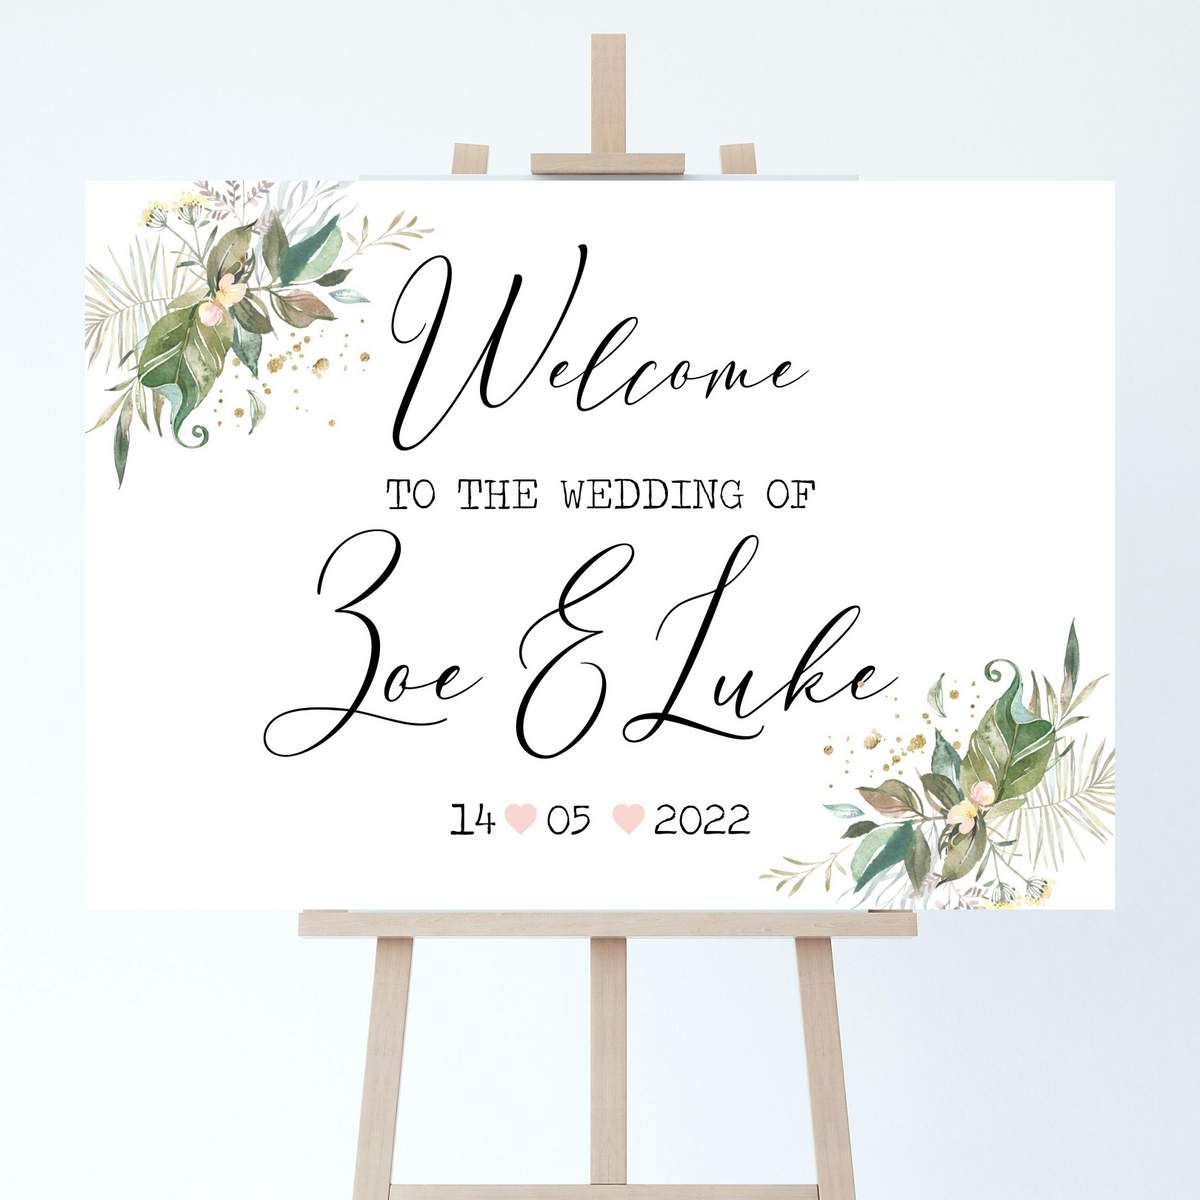 welcome to our wedding sign with woodland greenery delicate pink floral corner decoration